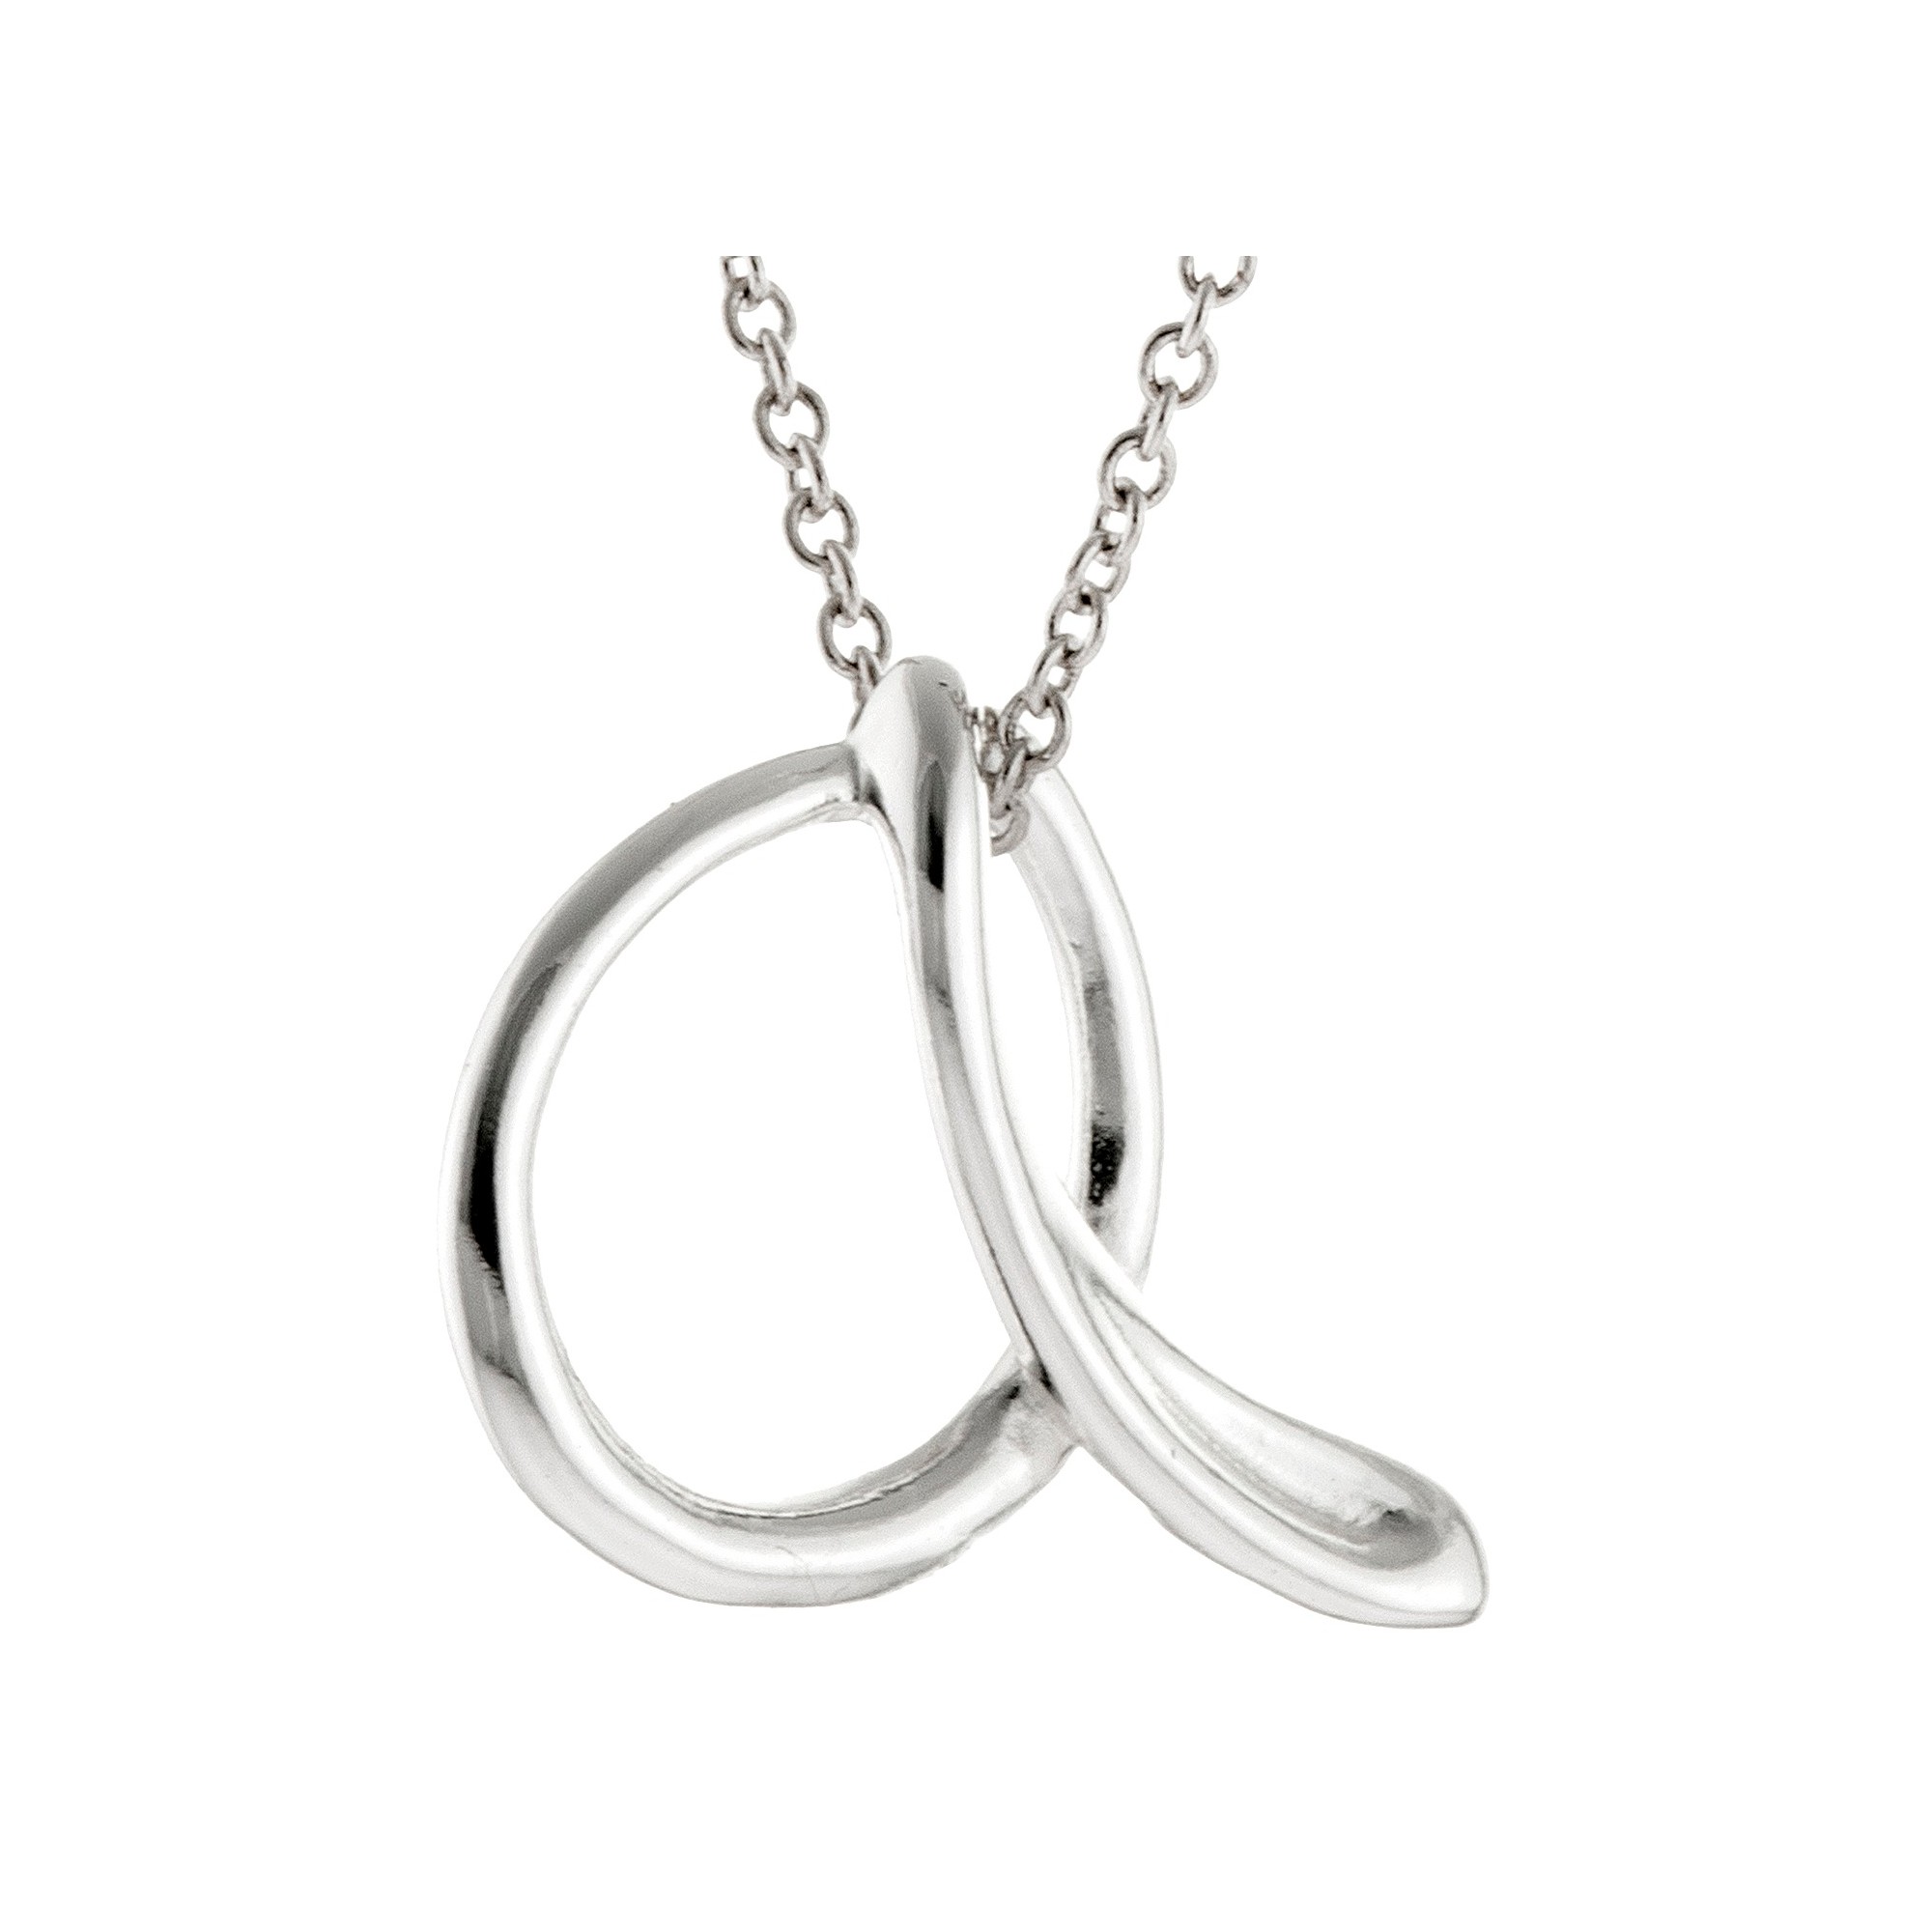 'Women's Silver Plated Letter ''A'' Pendant - Silver (18''), Size: Small'